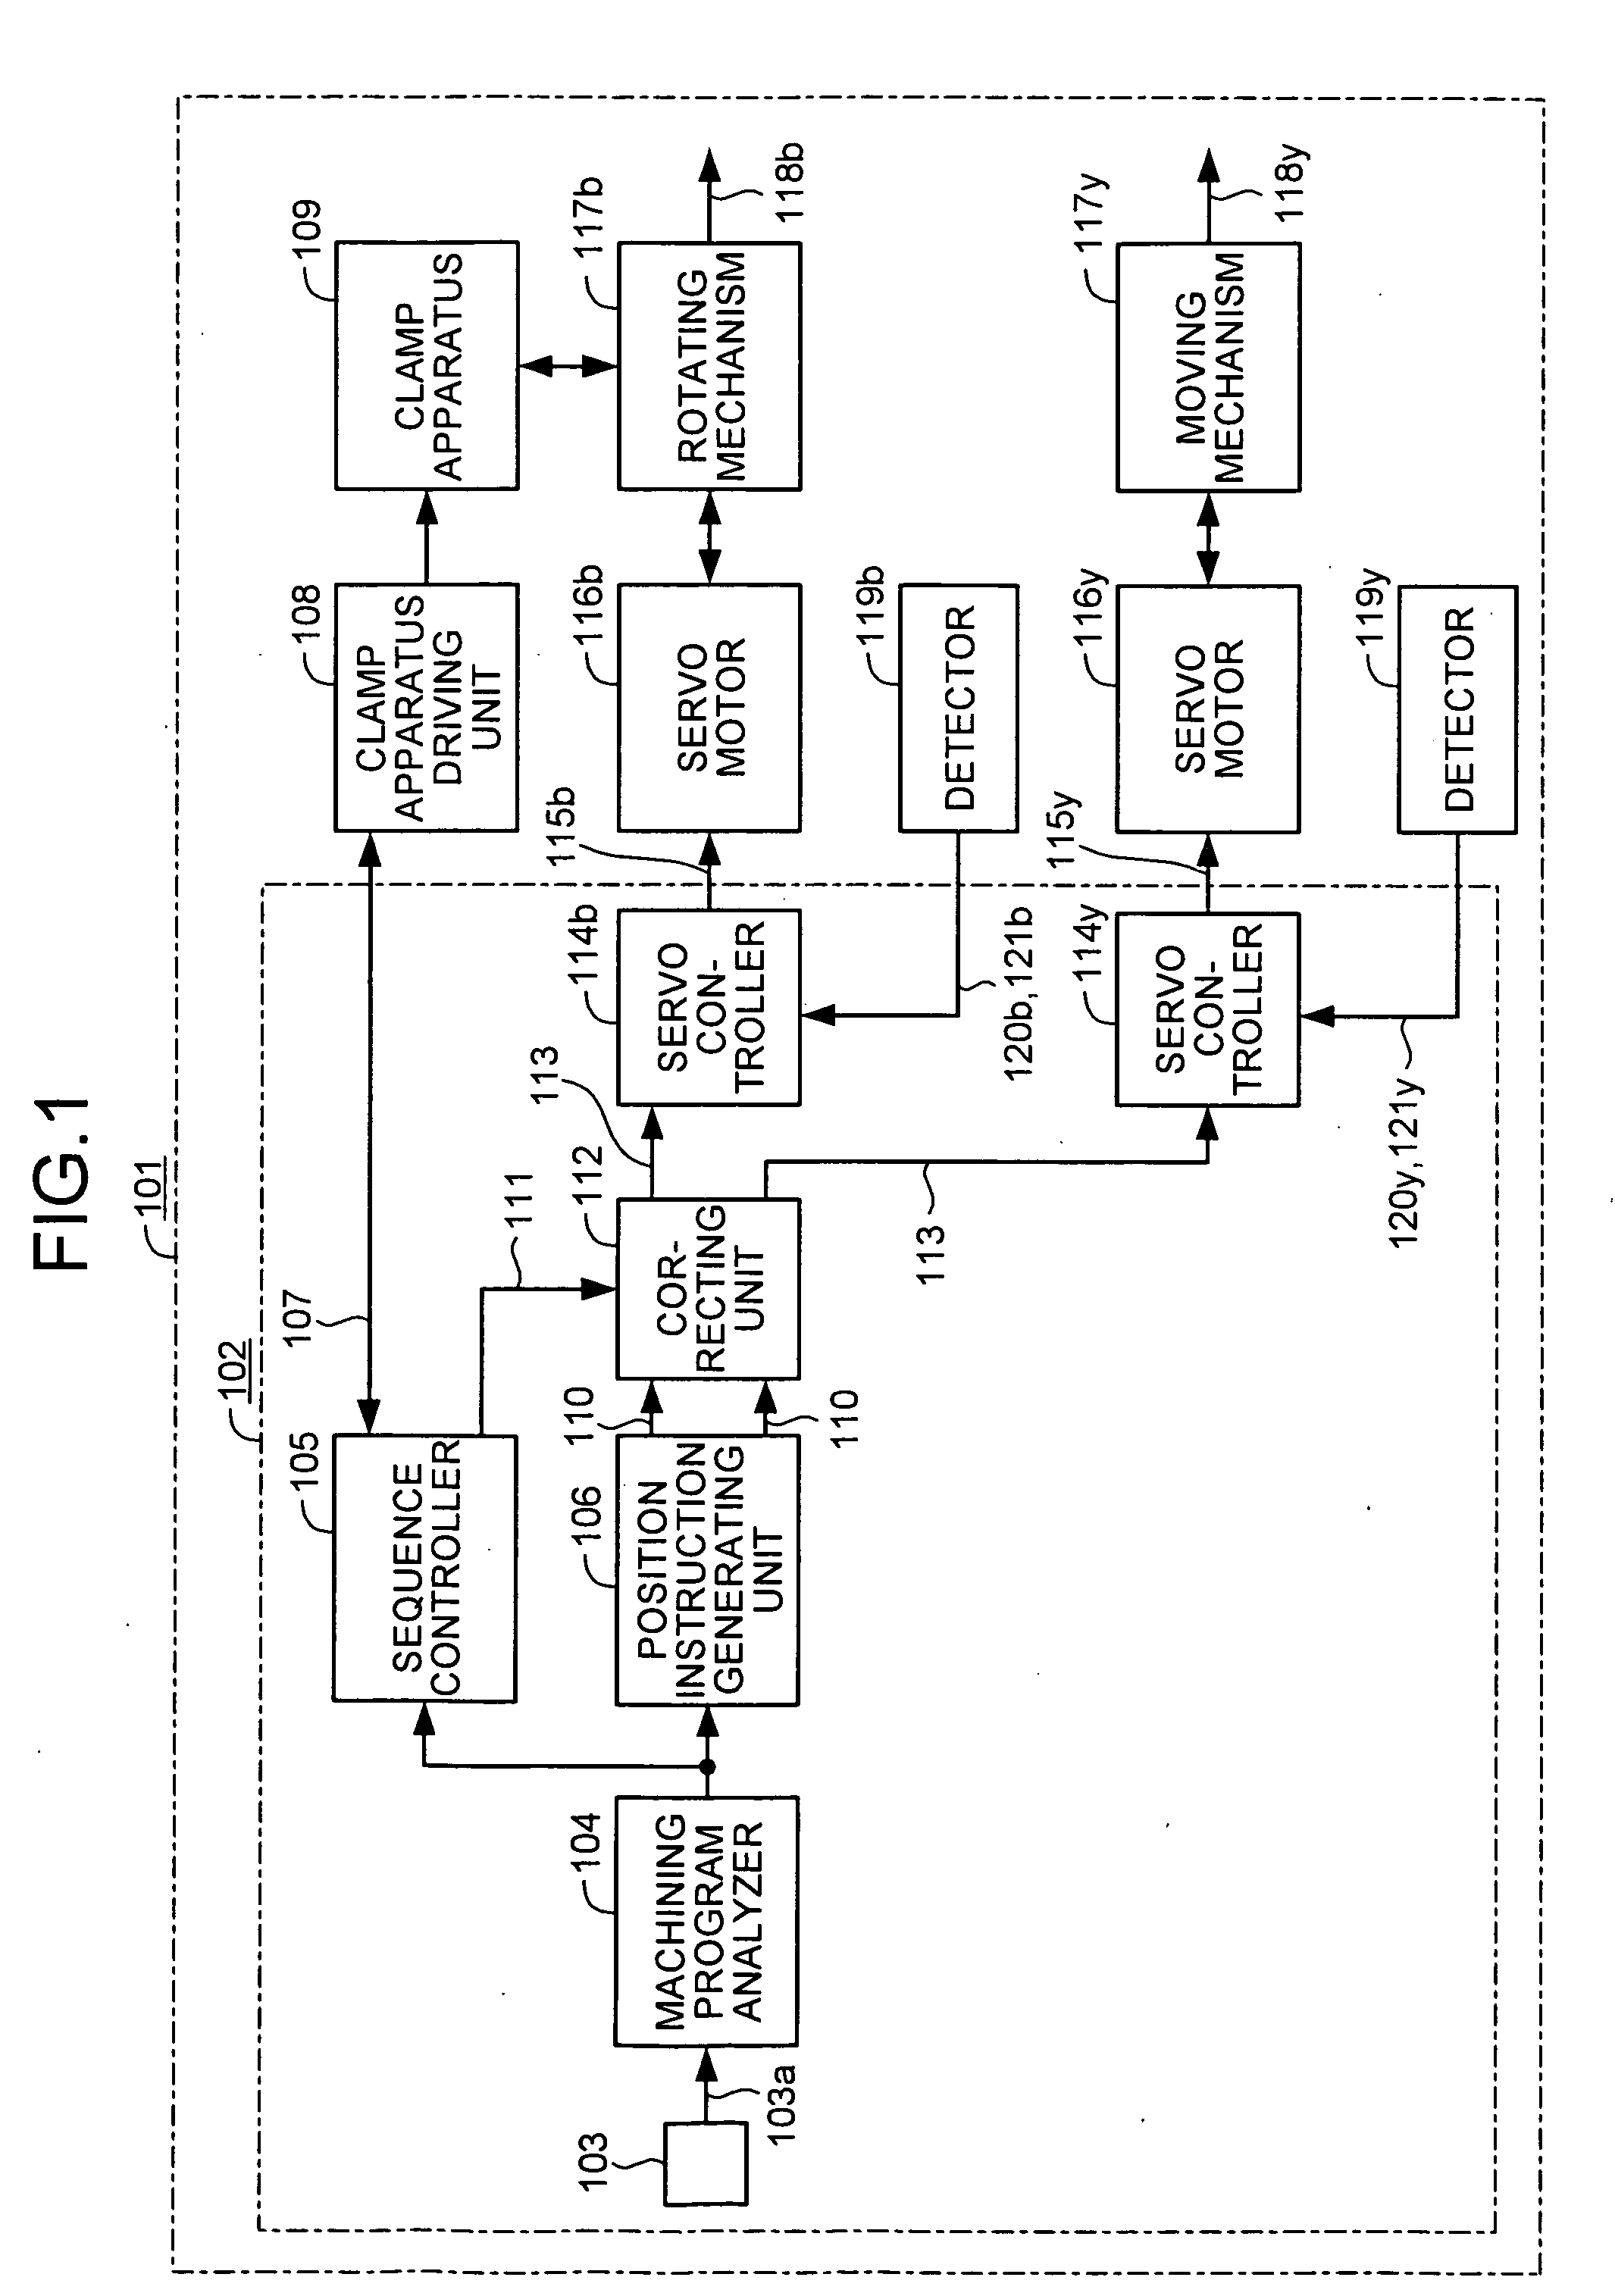 Numerical control apparatus and numerical control system